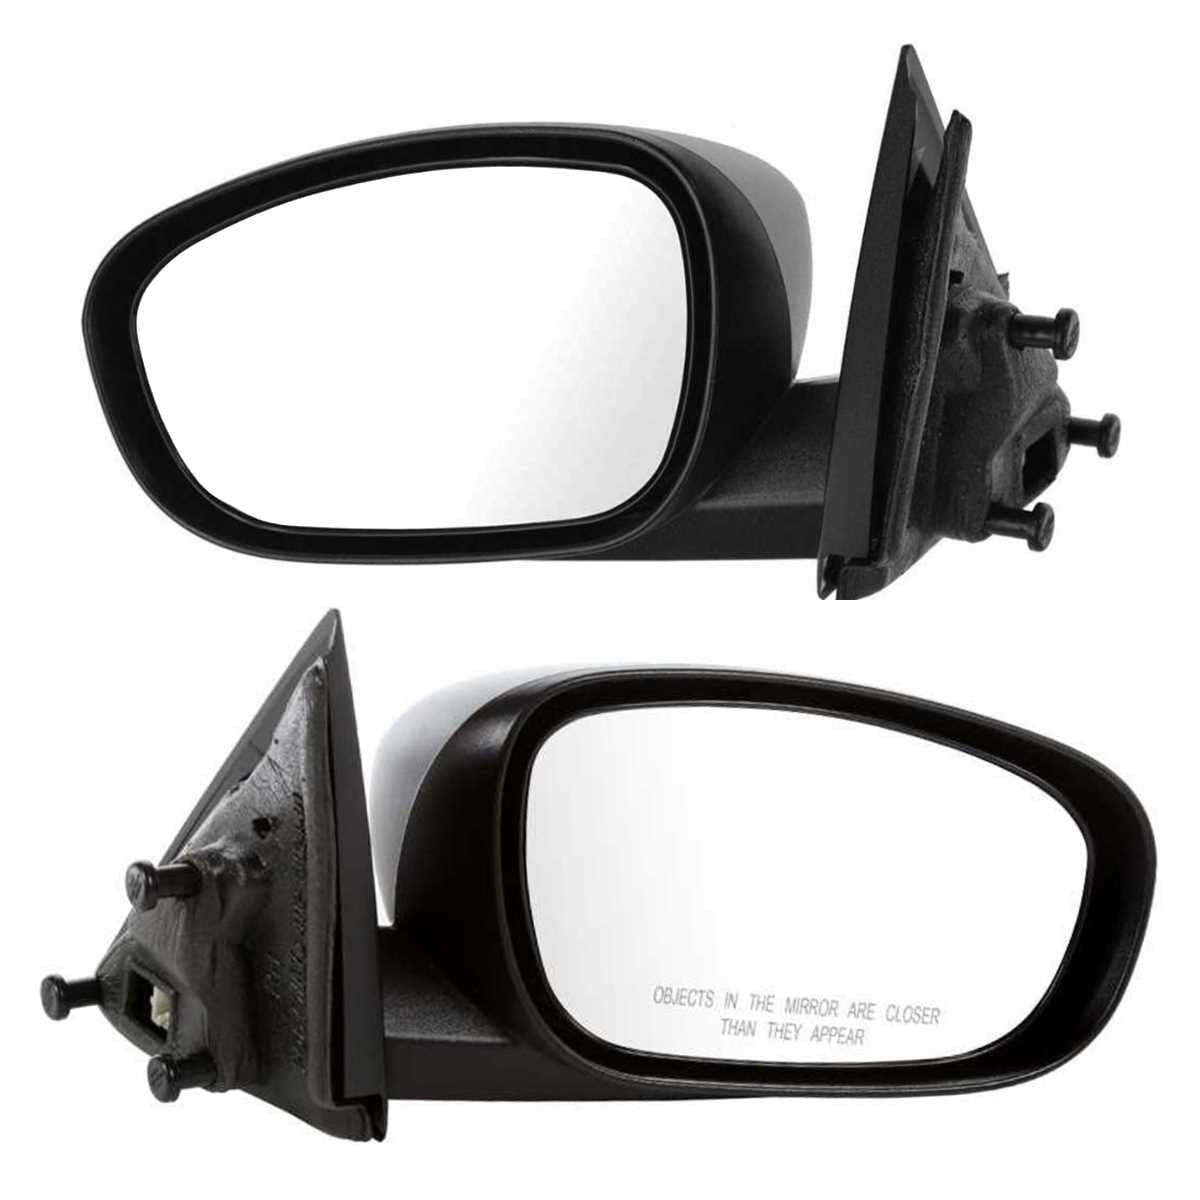 Driver and Passenger Textured Side View Mirrors for 2005-2008 Dodge Magnum 2007-2010 Chrysler 300 2006-2010 Dodge Charger 